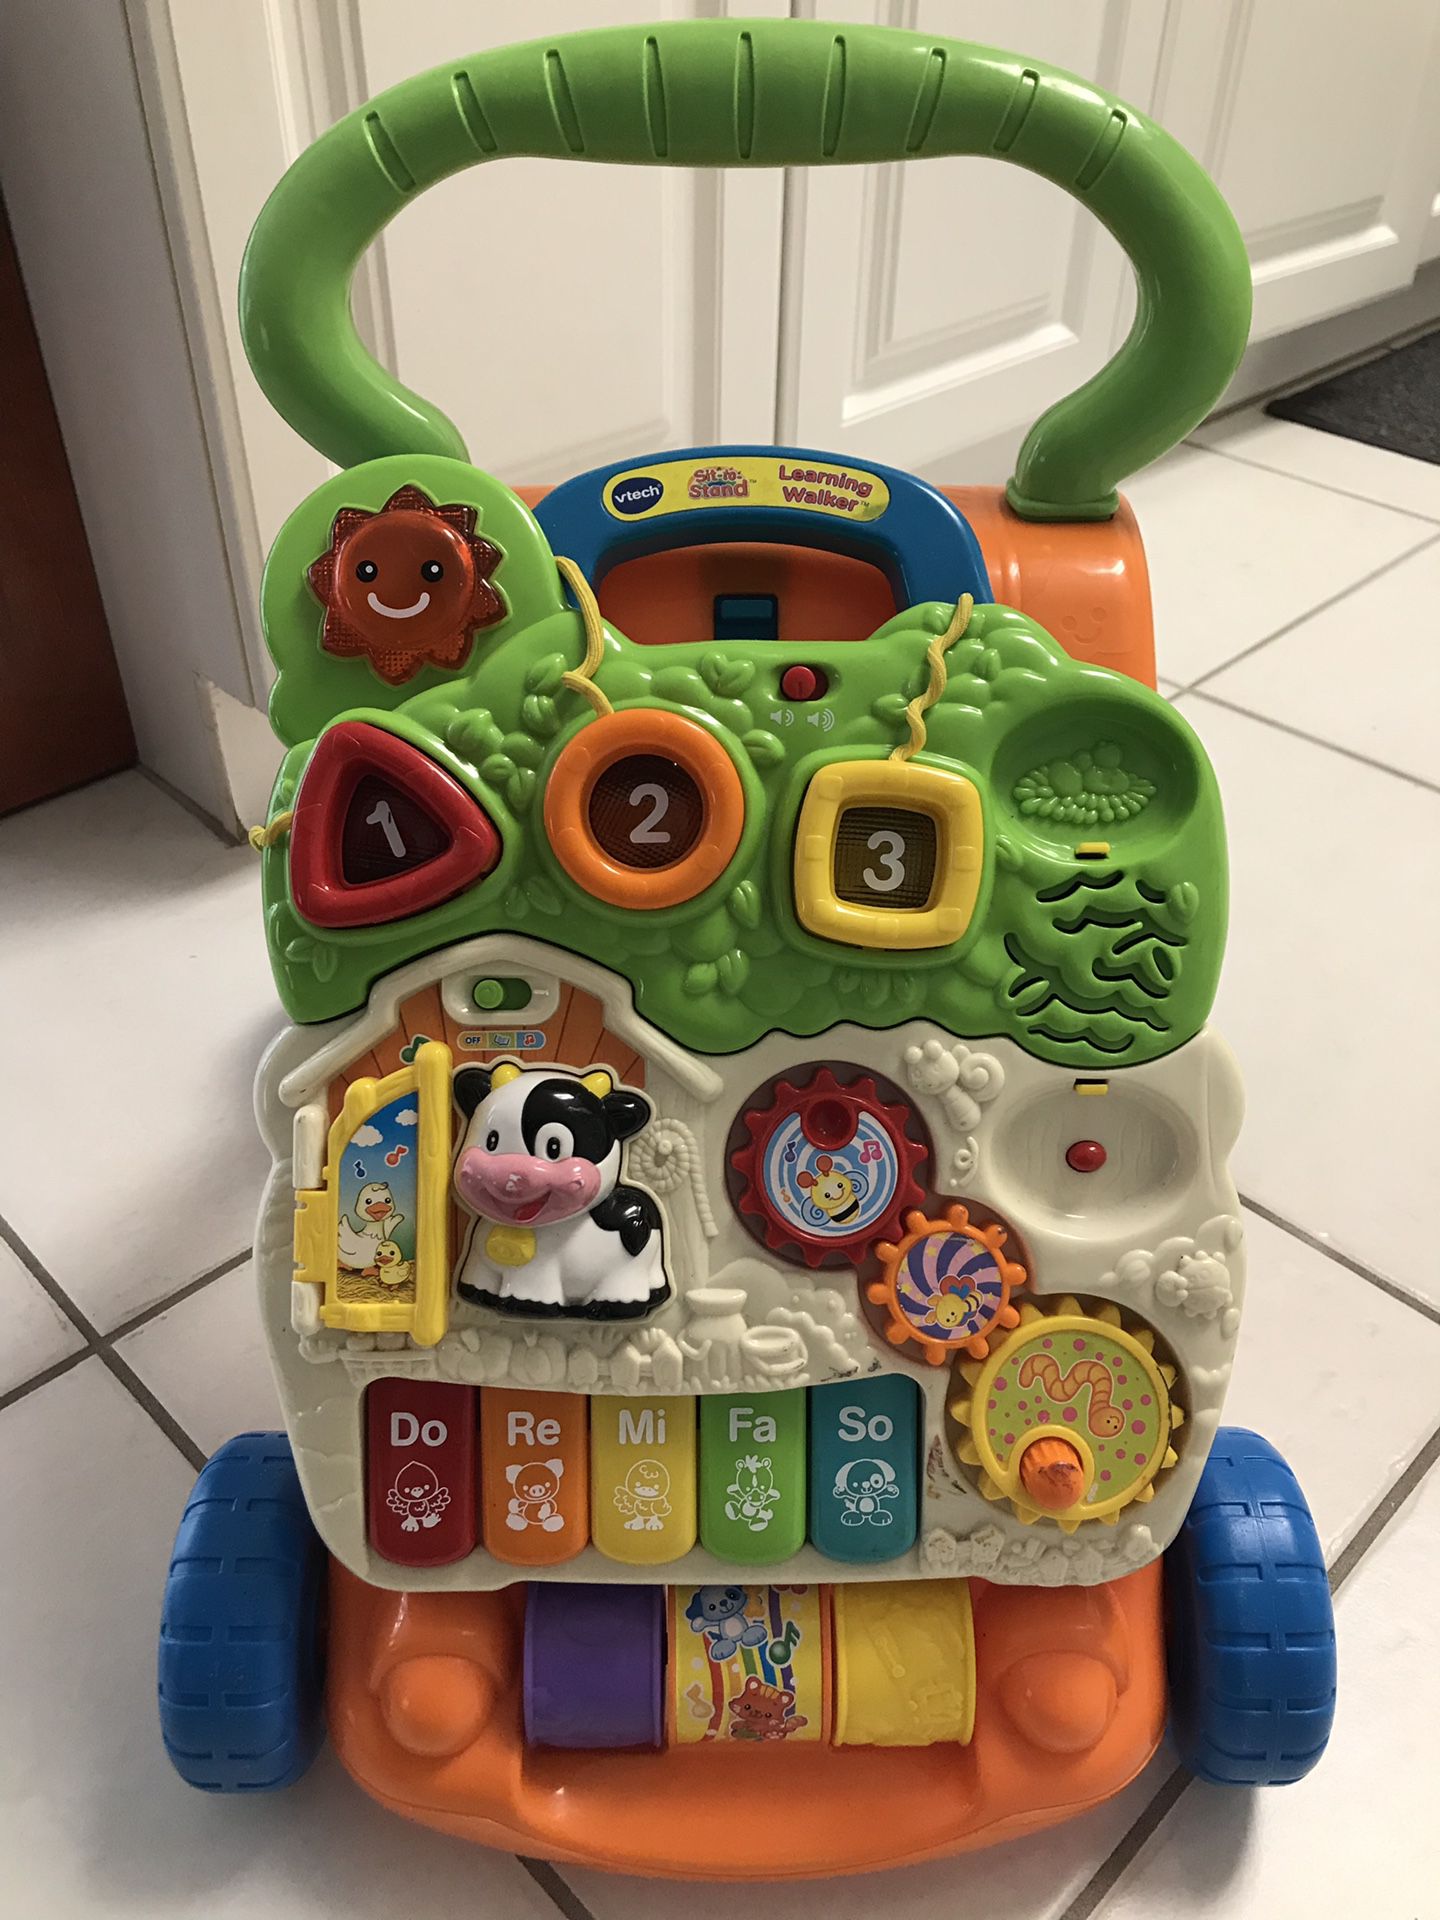 Vtech Sit to Stand Learning Walker Baby/Toddler toy.